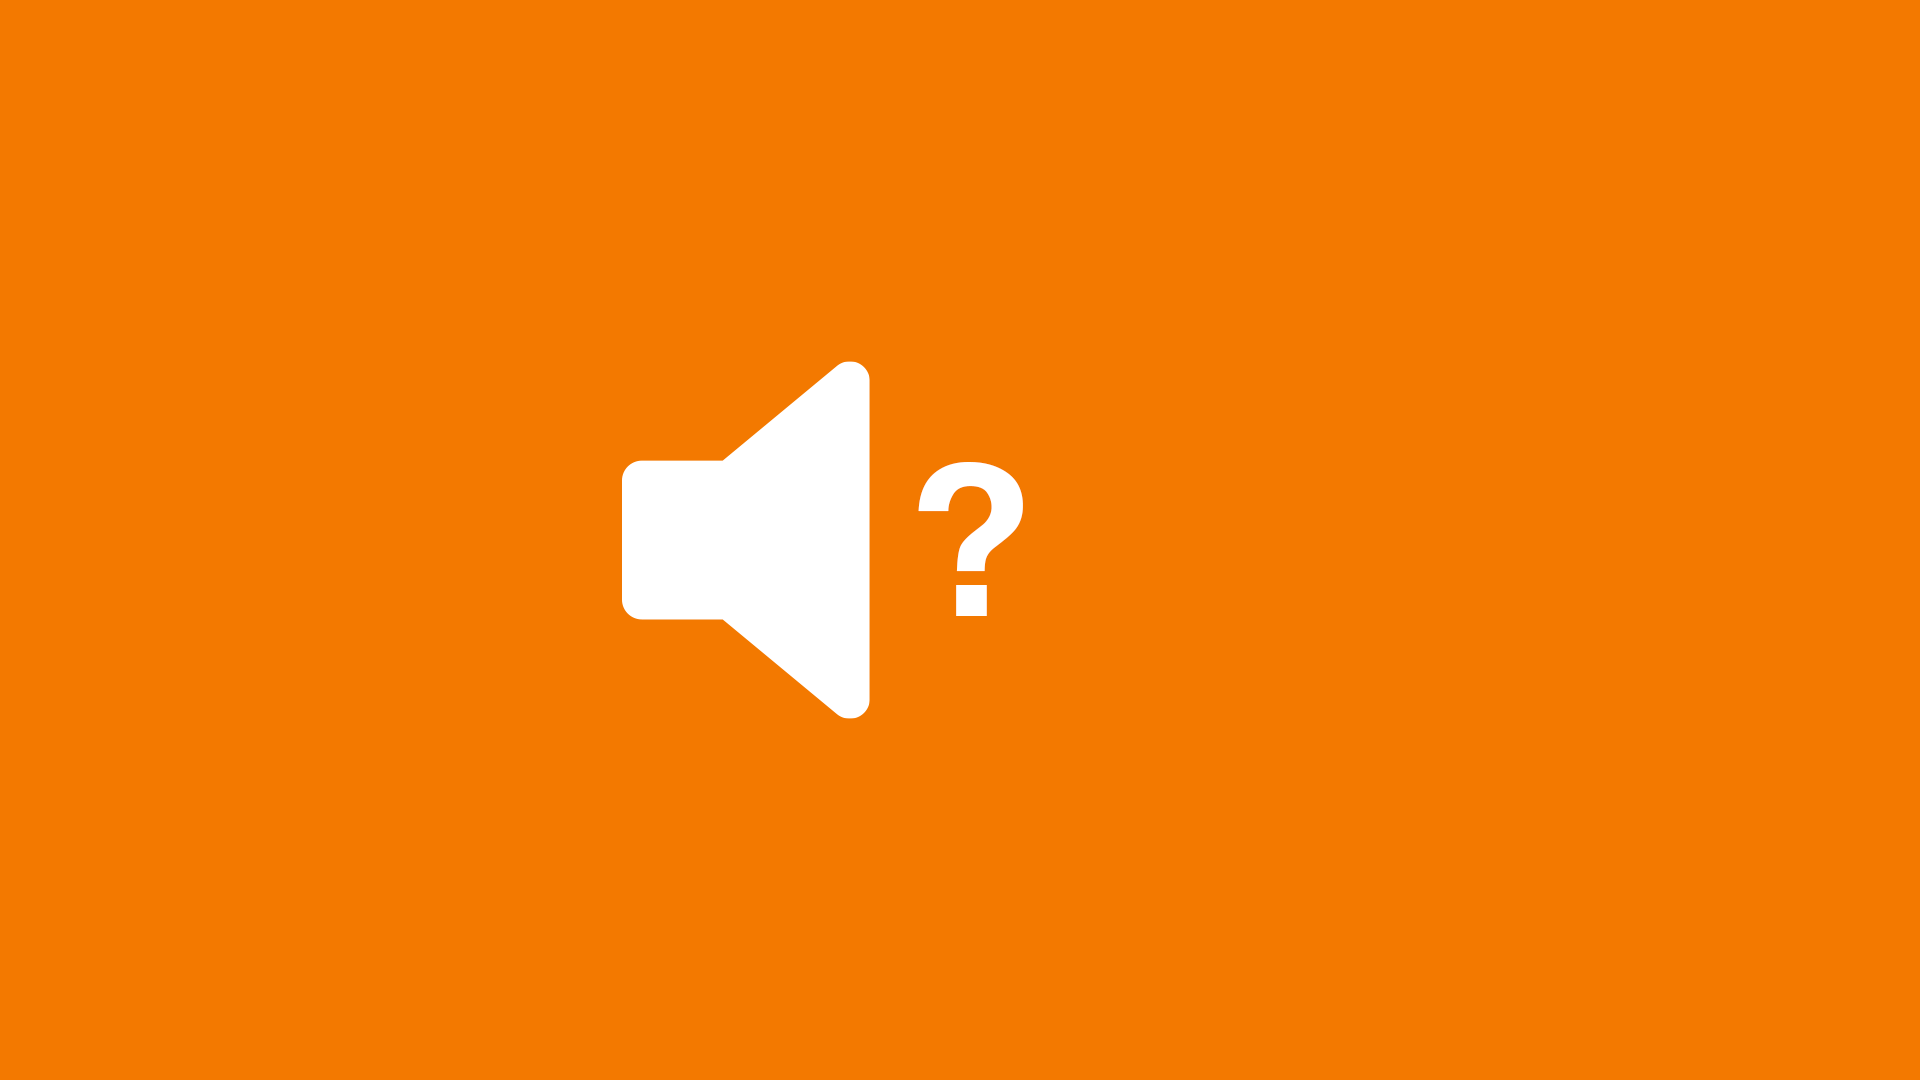 Illustration of a sound icon with question marks coming out getting progressively larger.